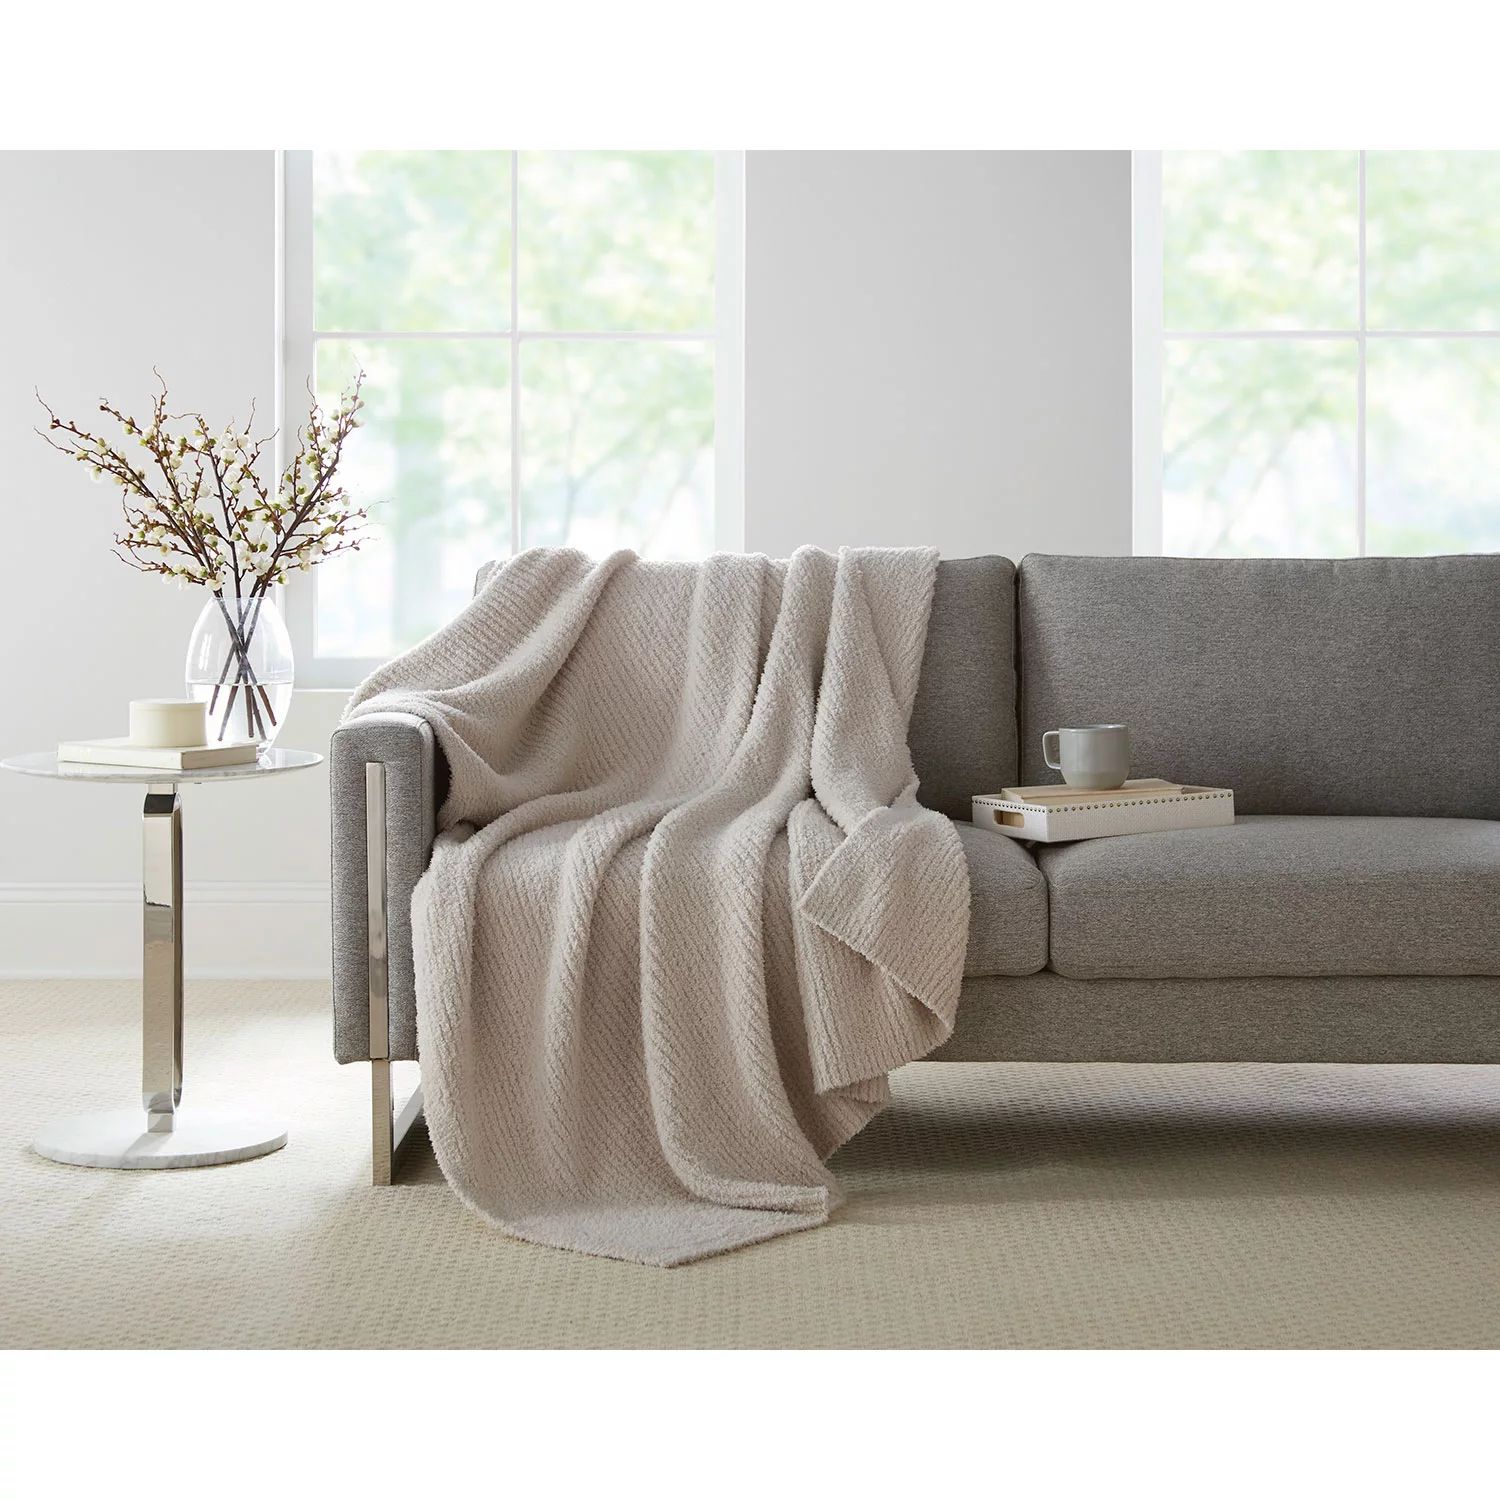 Member's Mark Luxury Premier Collection Cozy Knit Throw (Assorted Colors) | Sam's Club